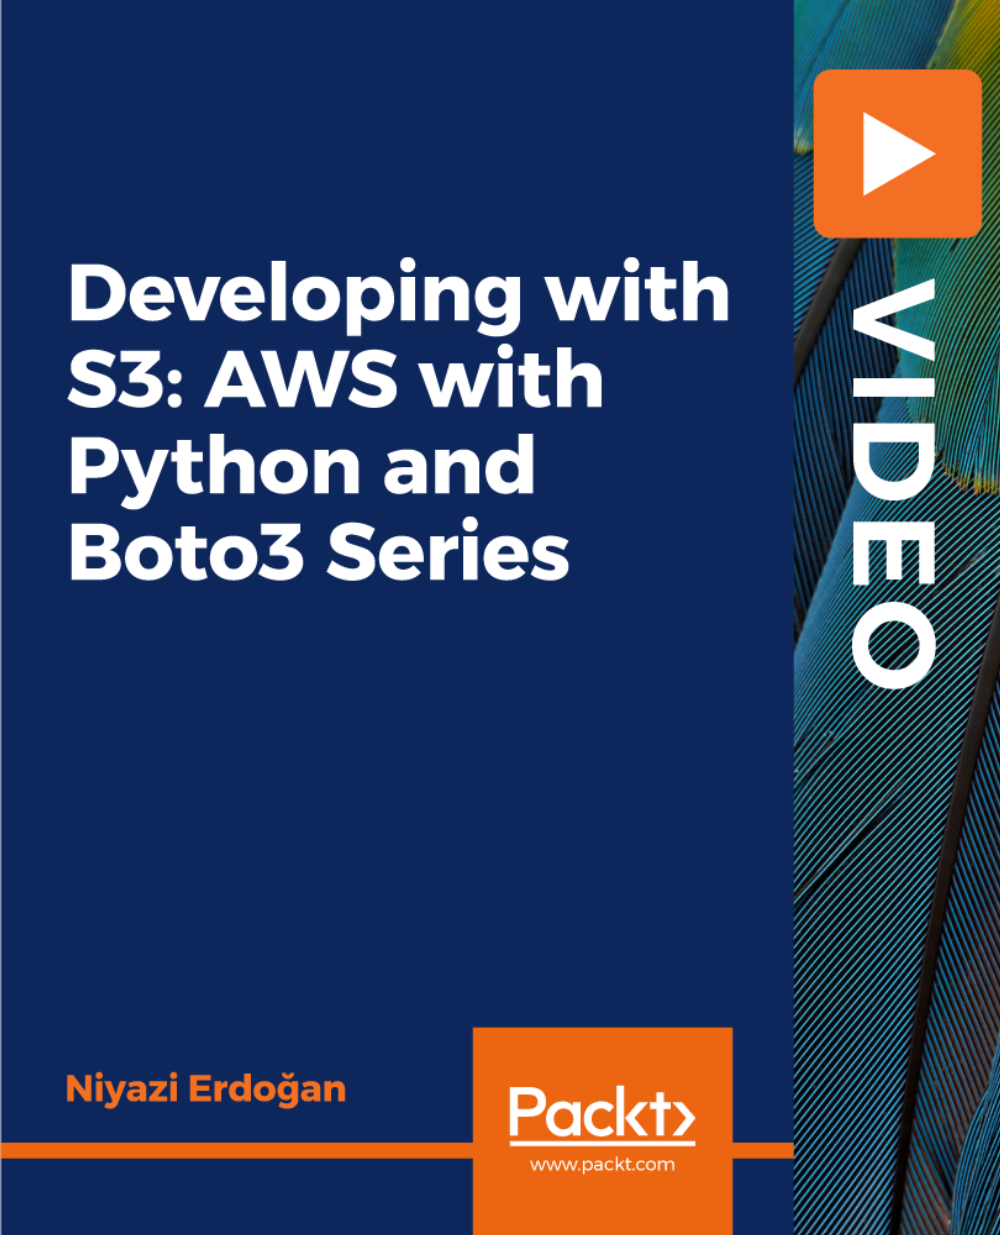 Developing with S3 - AWS with Python and Boto3 Series